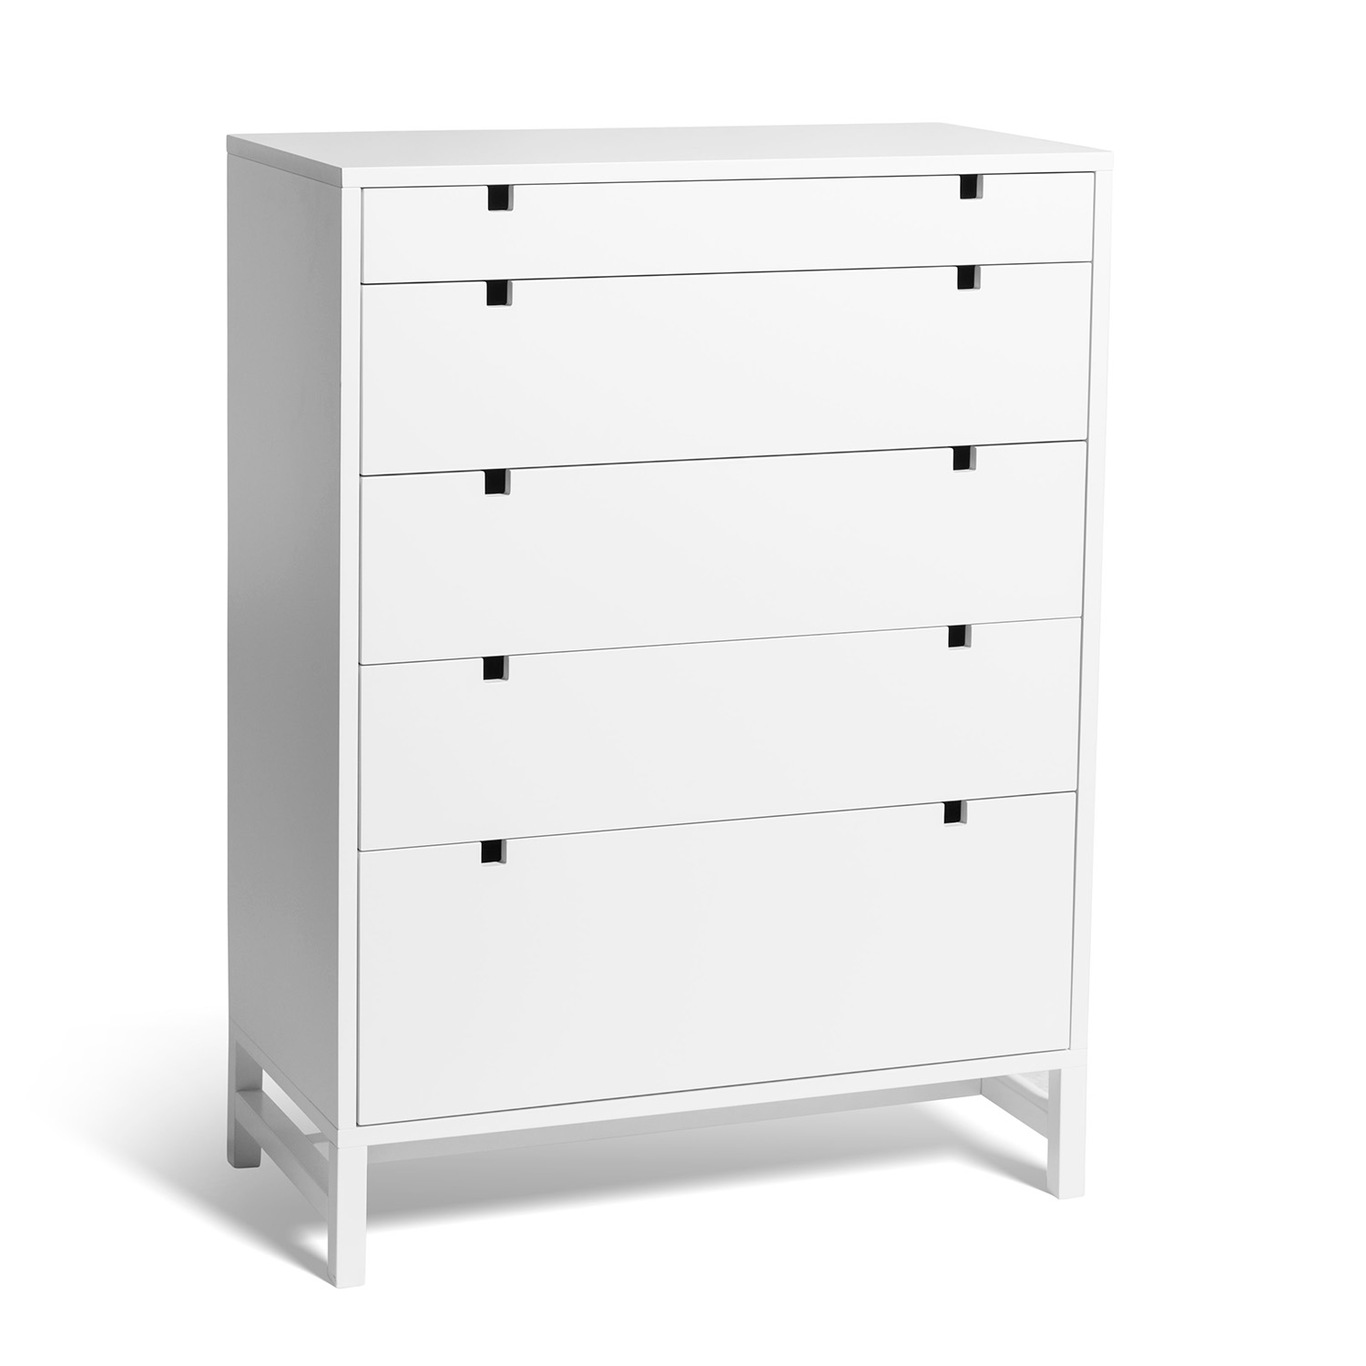 Falsterbo Chest Of Drawers Five Drawers 80x40x108 cm, White